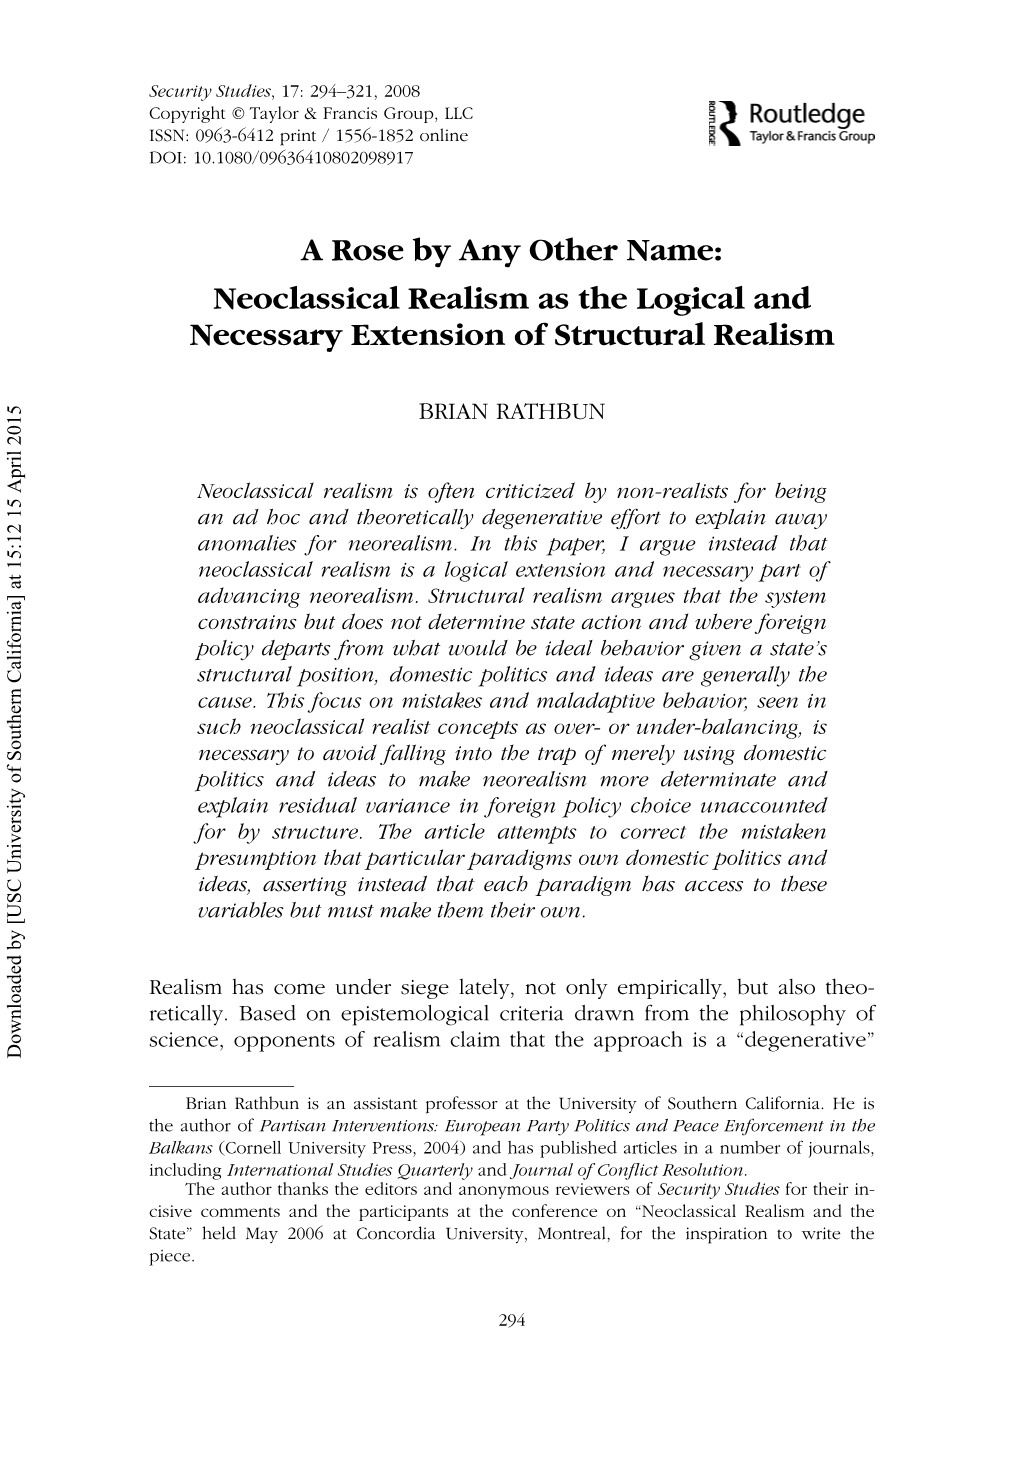 A Rose by Any Other Name: Neoclassical Realism As the Logical and Necessary Extension of Structural Realism